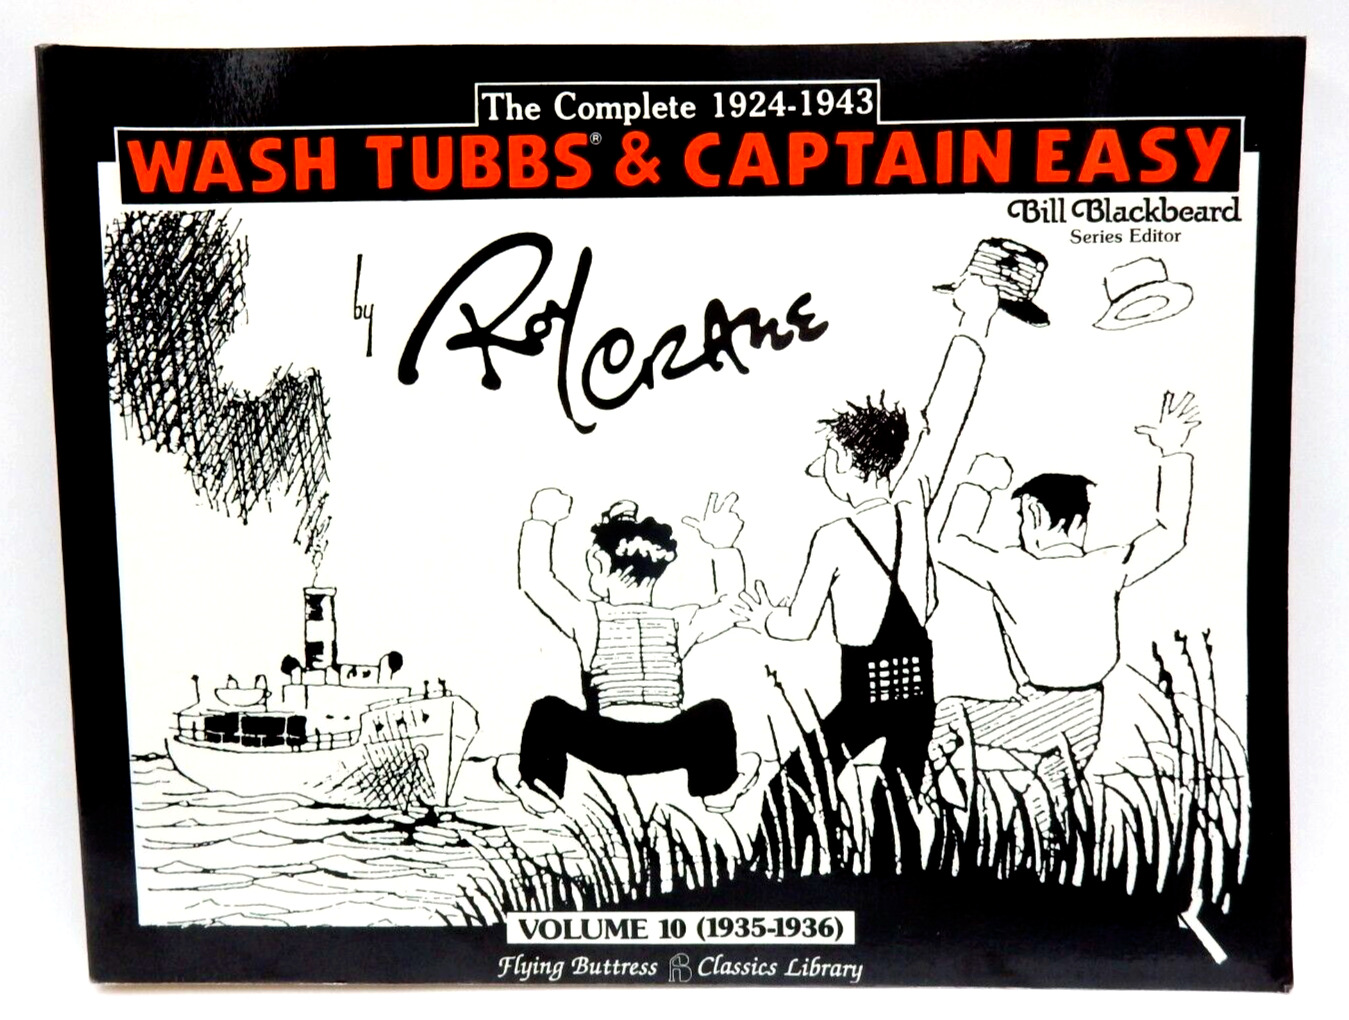 THE COMPLETE WASH TUBBS & CAPTAIN EASY VOLUME 10 (1935-1936) FLYING BUTTRESS